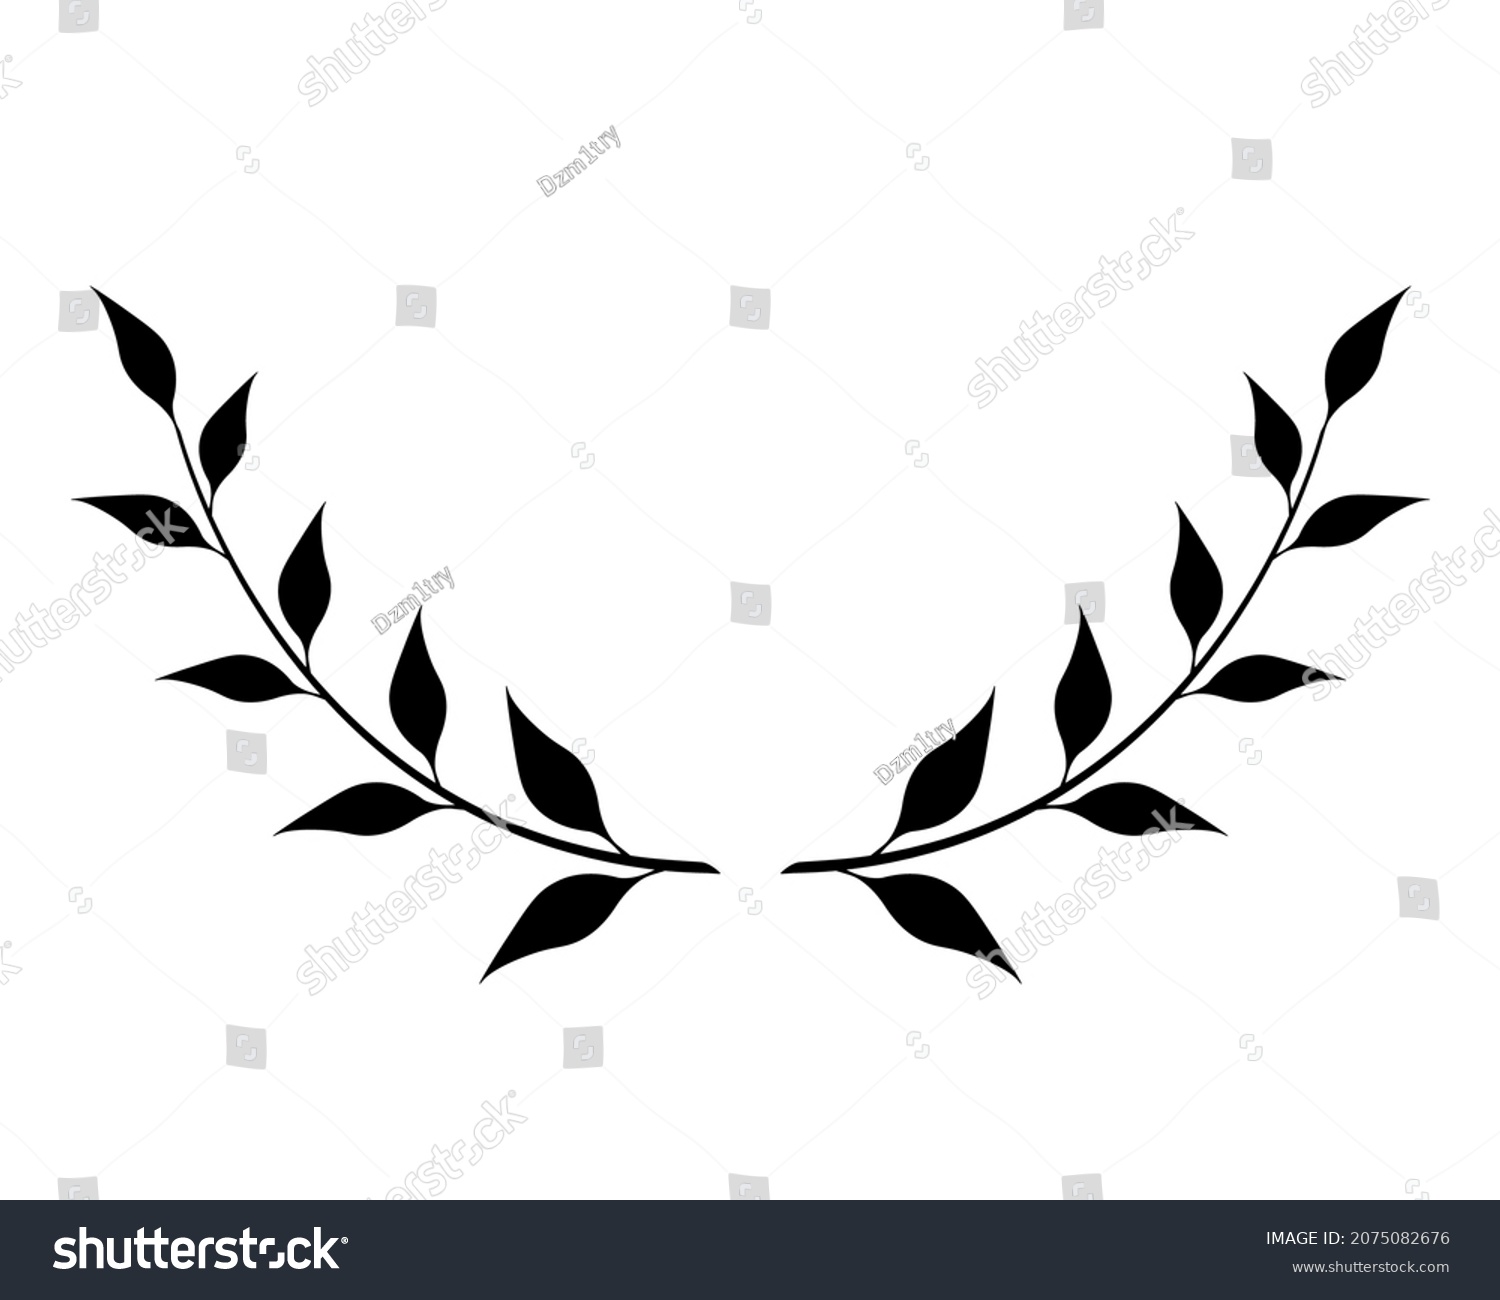 SVG of Half leaf wreath silhouette icon . Clipart image isolated on white background svg